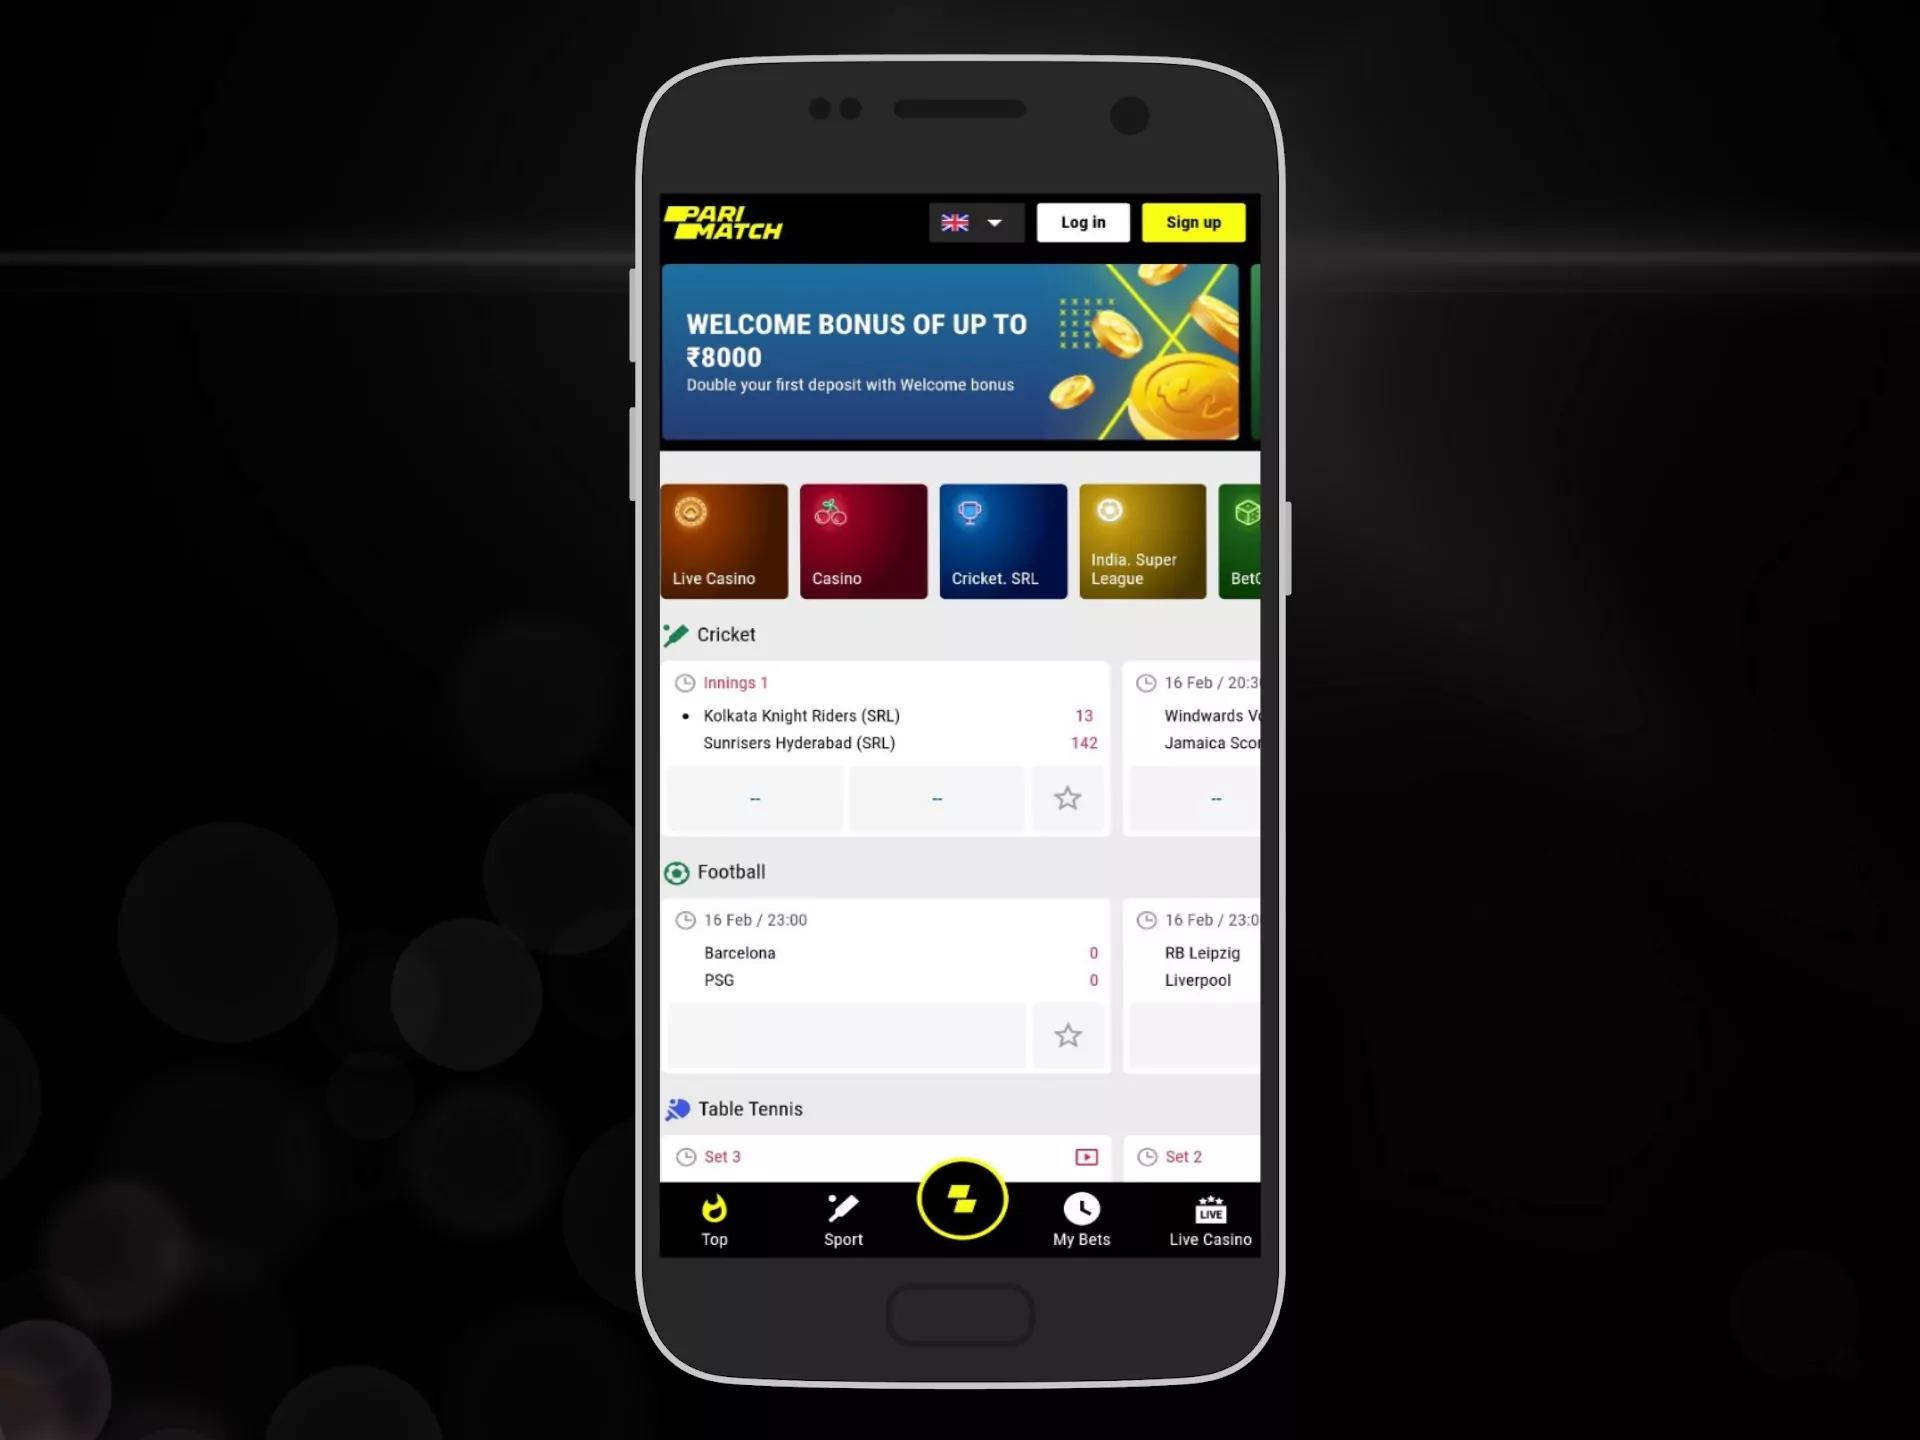 Open the Android app on your smartphone and start playing casino games.